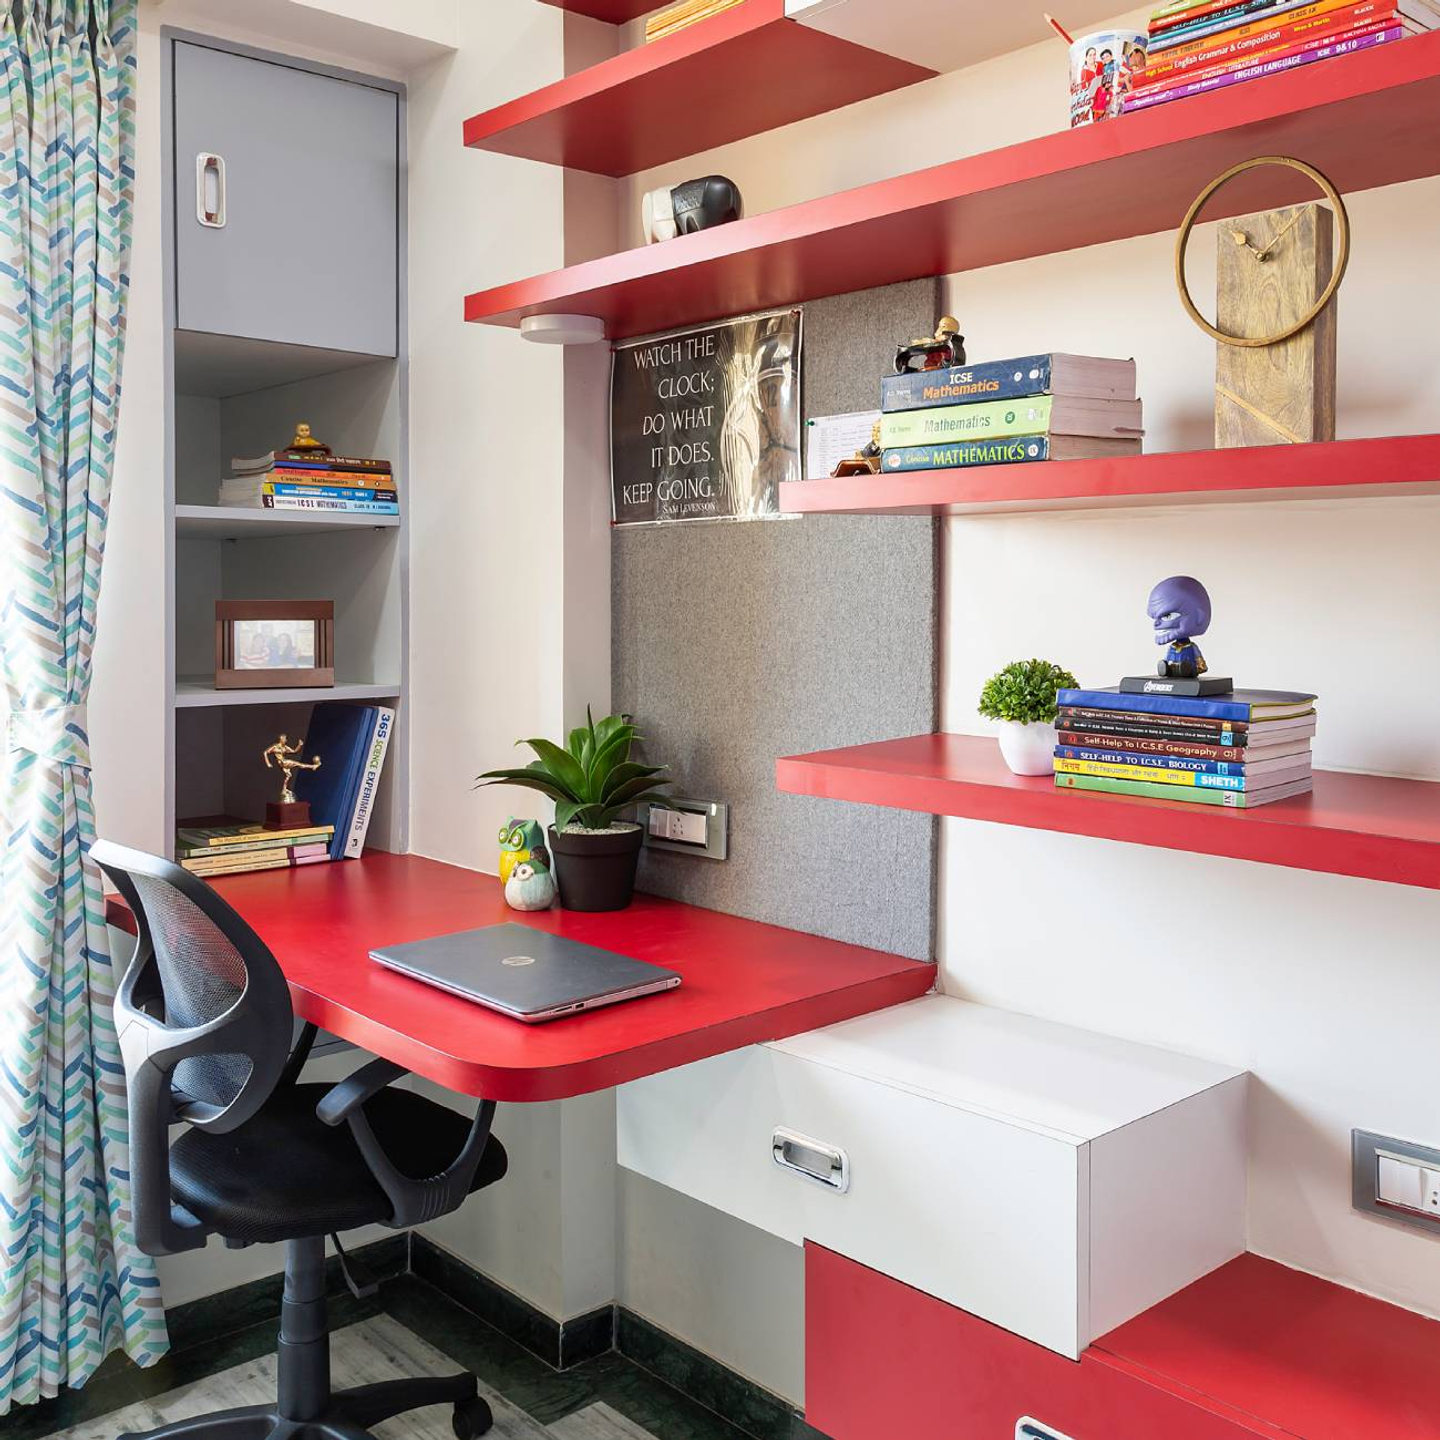 Home Office Design With Red And White Shelves And Study Table - Livspace